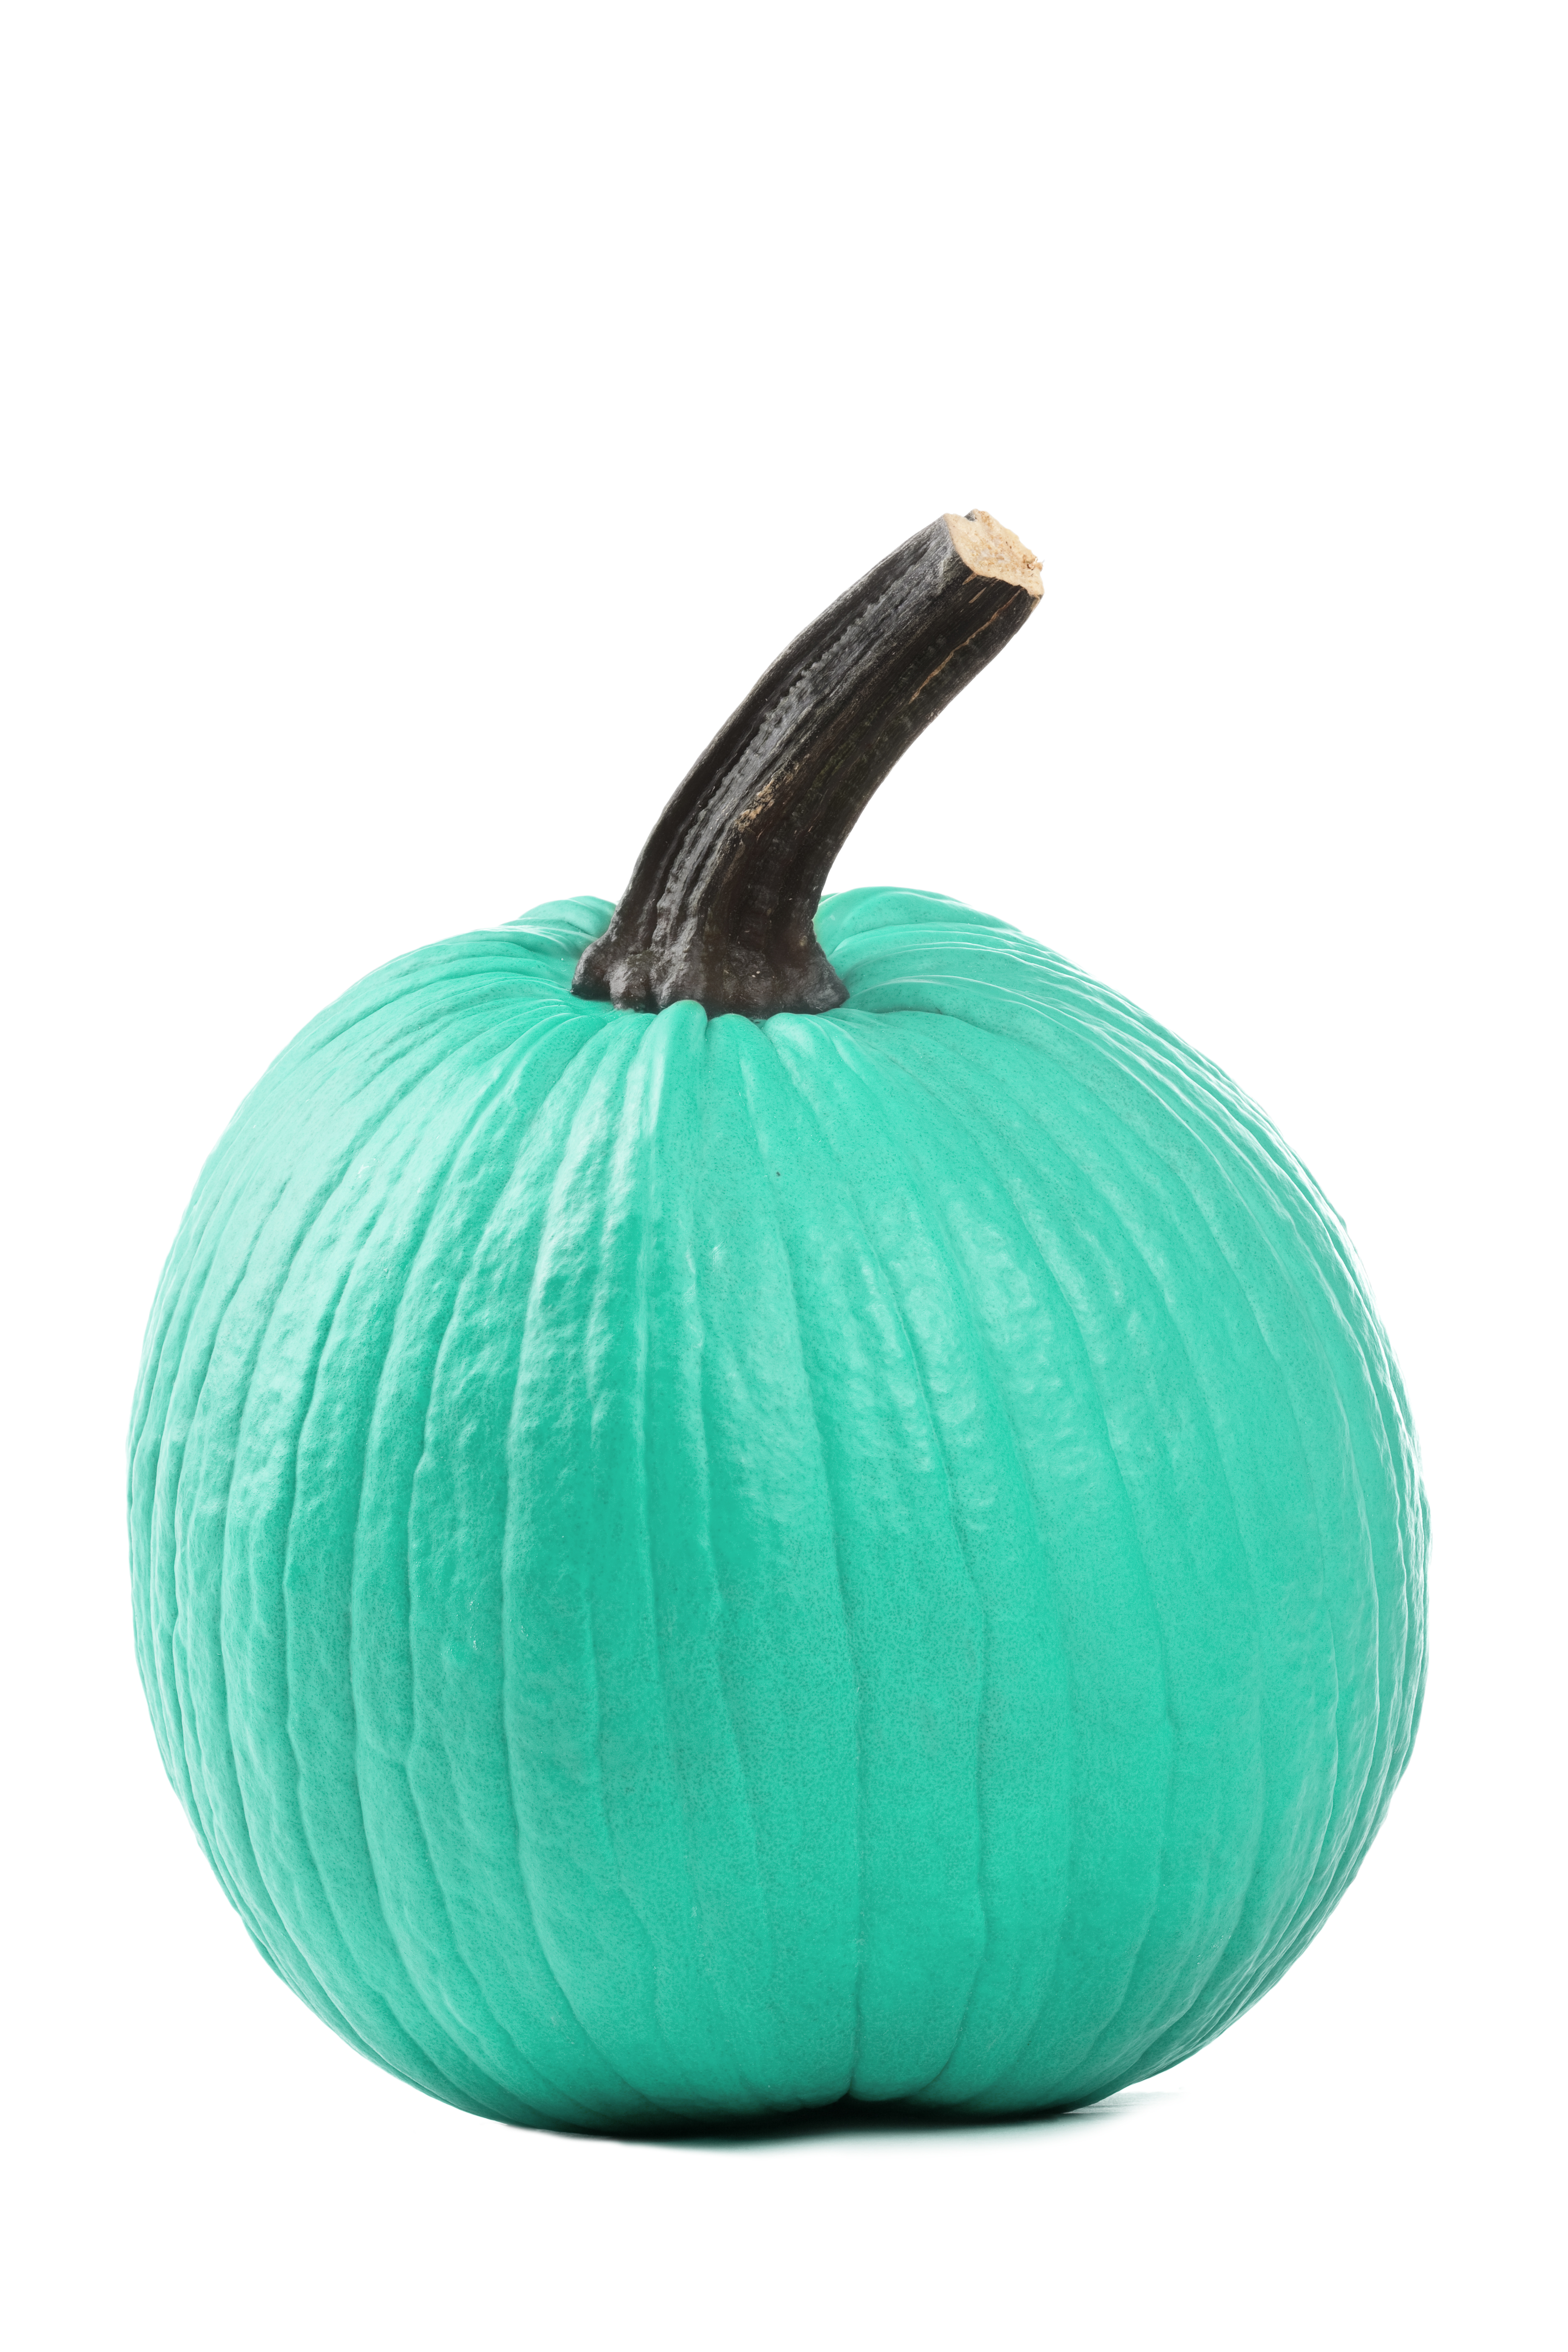 Halloween: Teal Pumpkins Mean Allergy-Safe Candy for Trick or ...